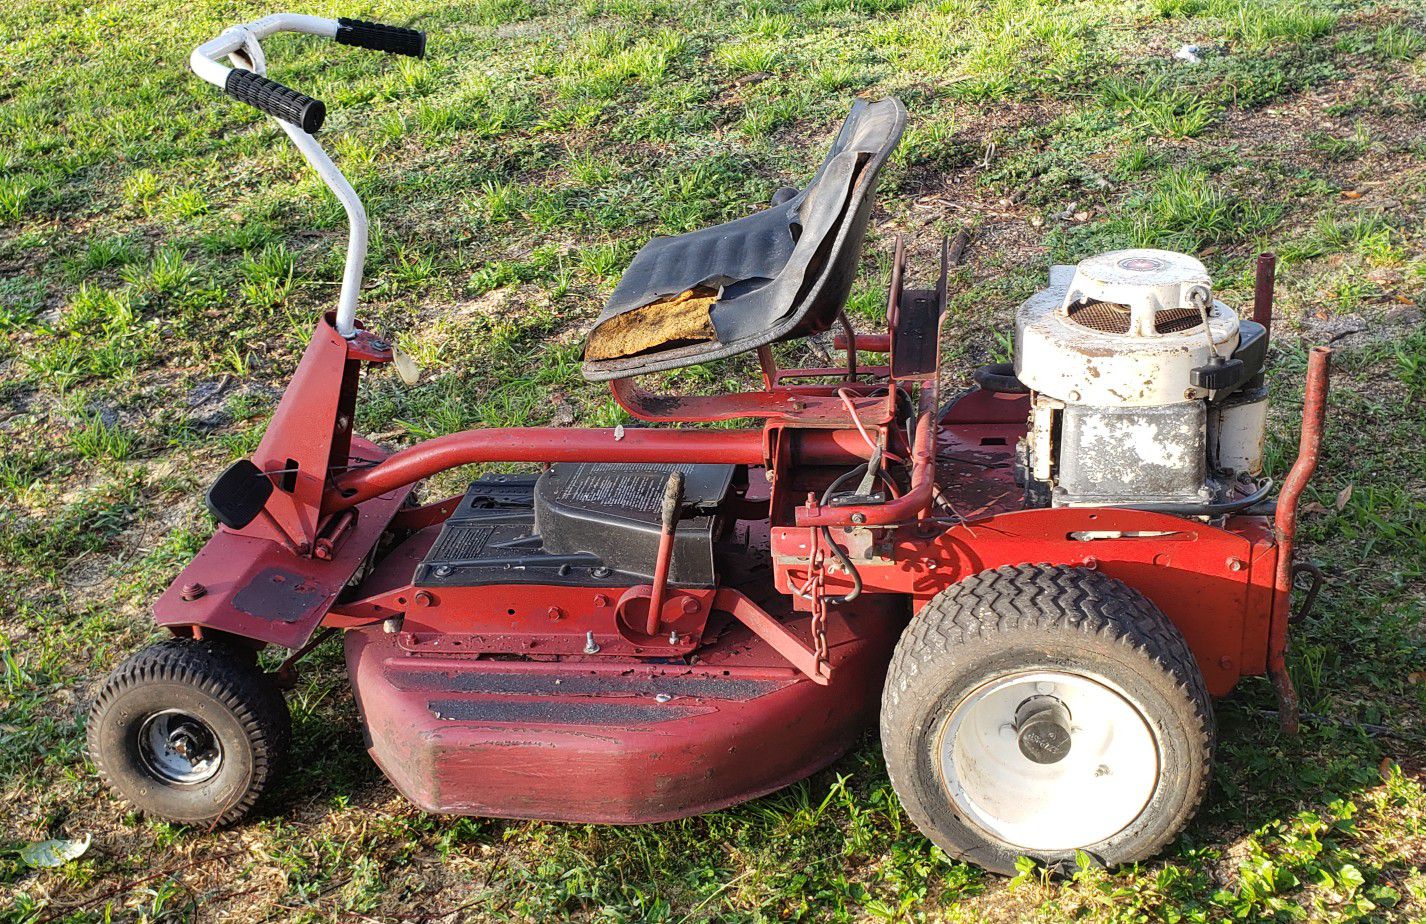 Snapper rear engine riding lawn mower parts for repair